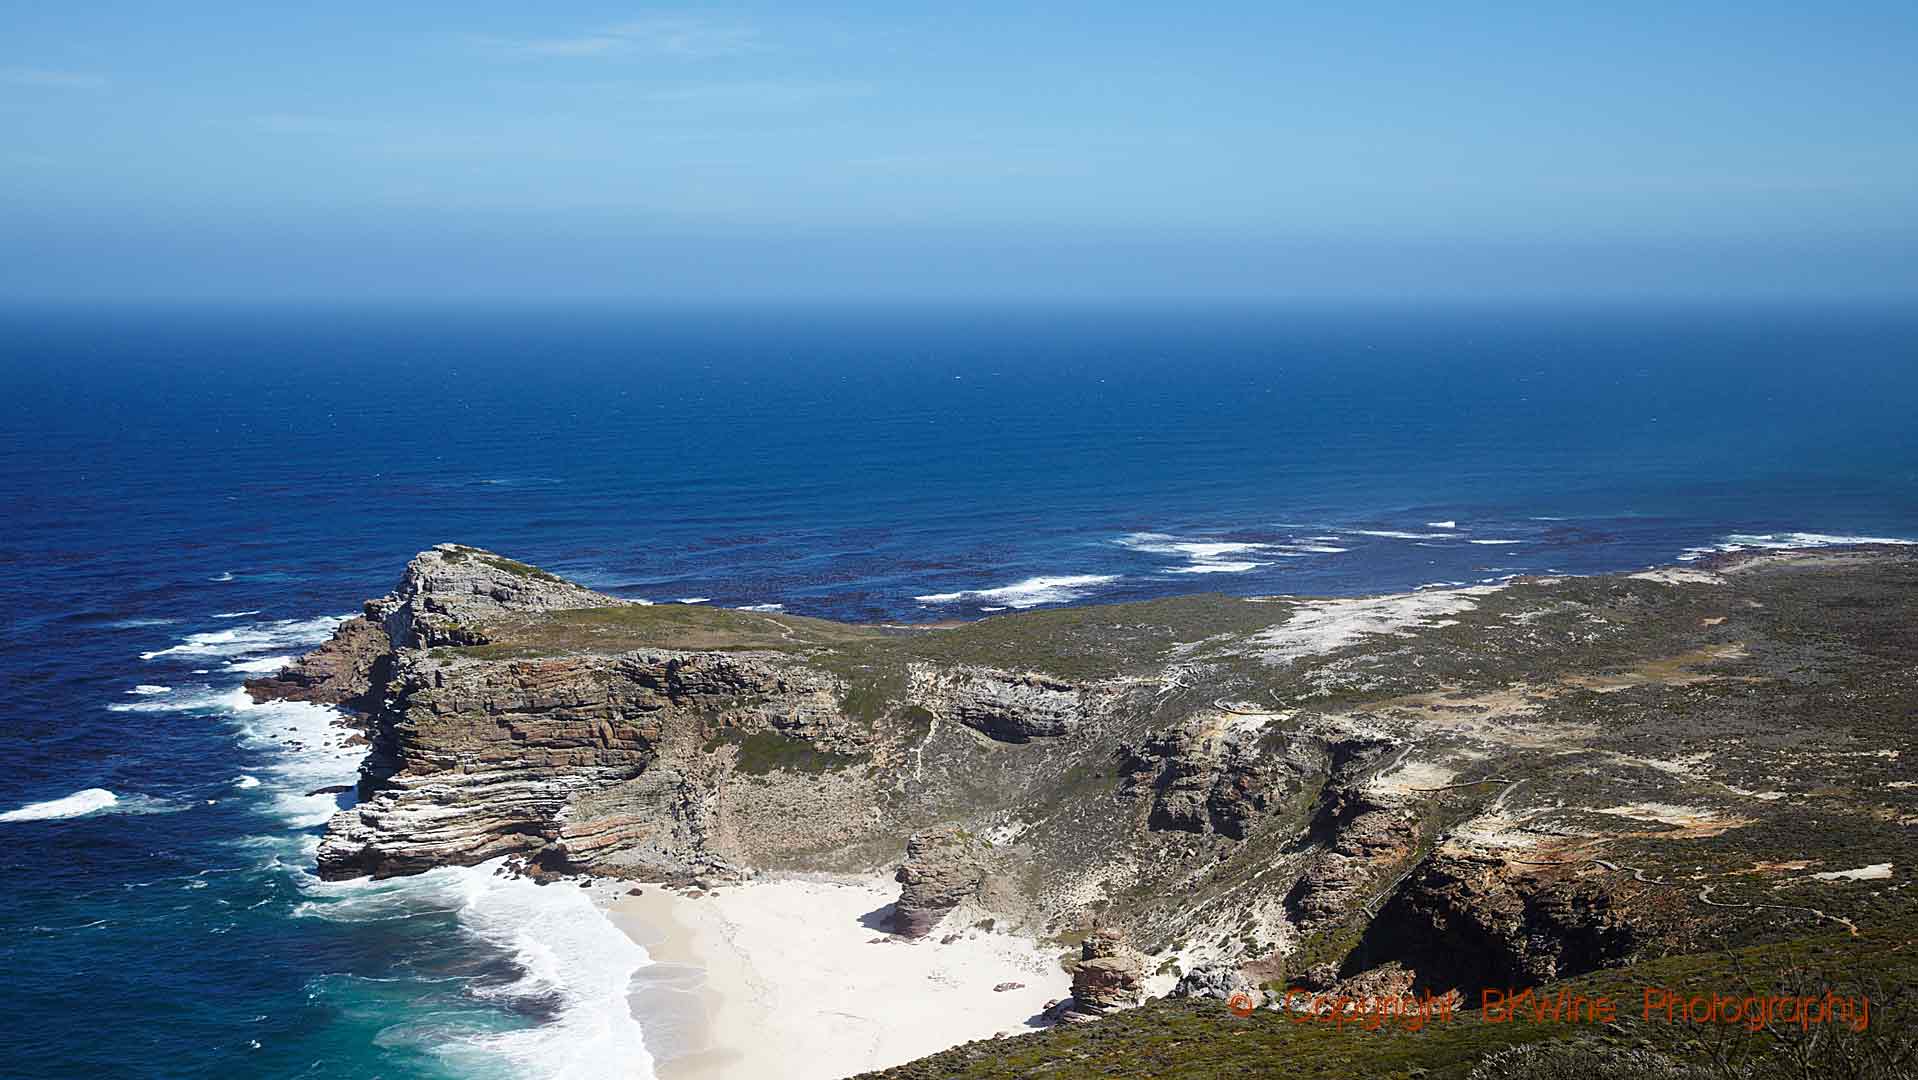 Near the Cape of Good Hope on the Cape Peninsula, South Africa